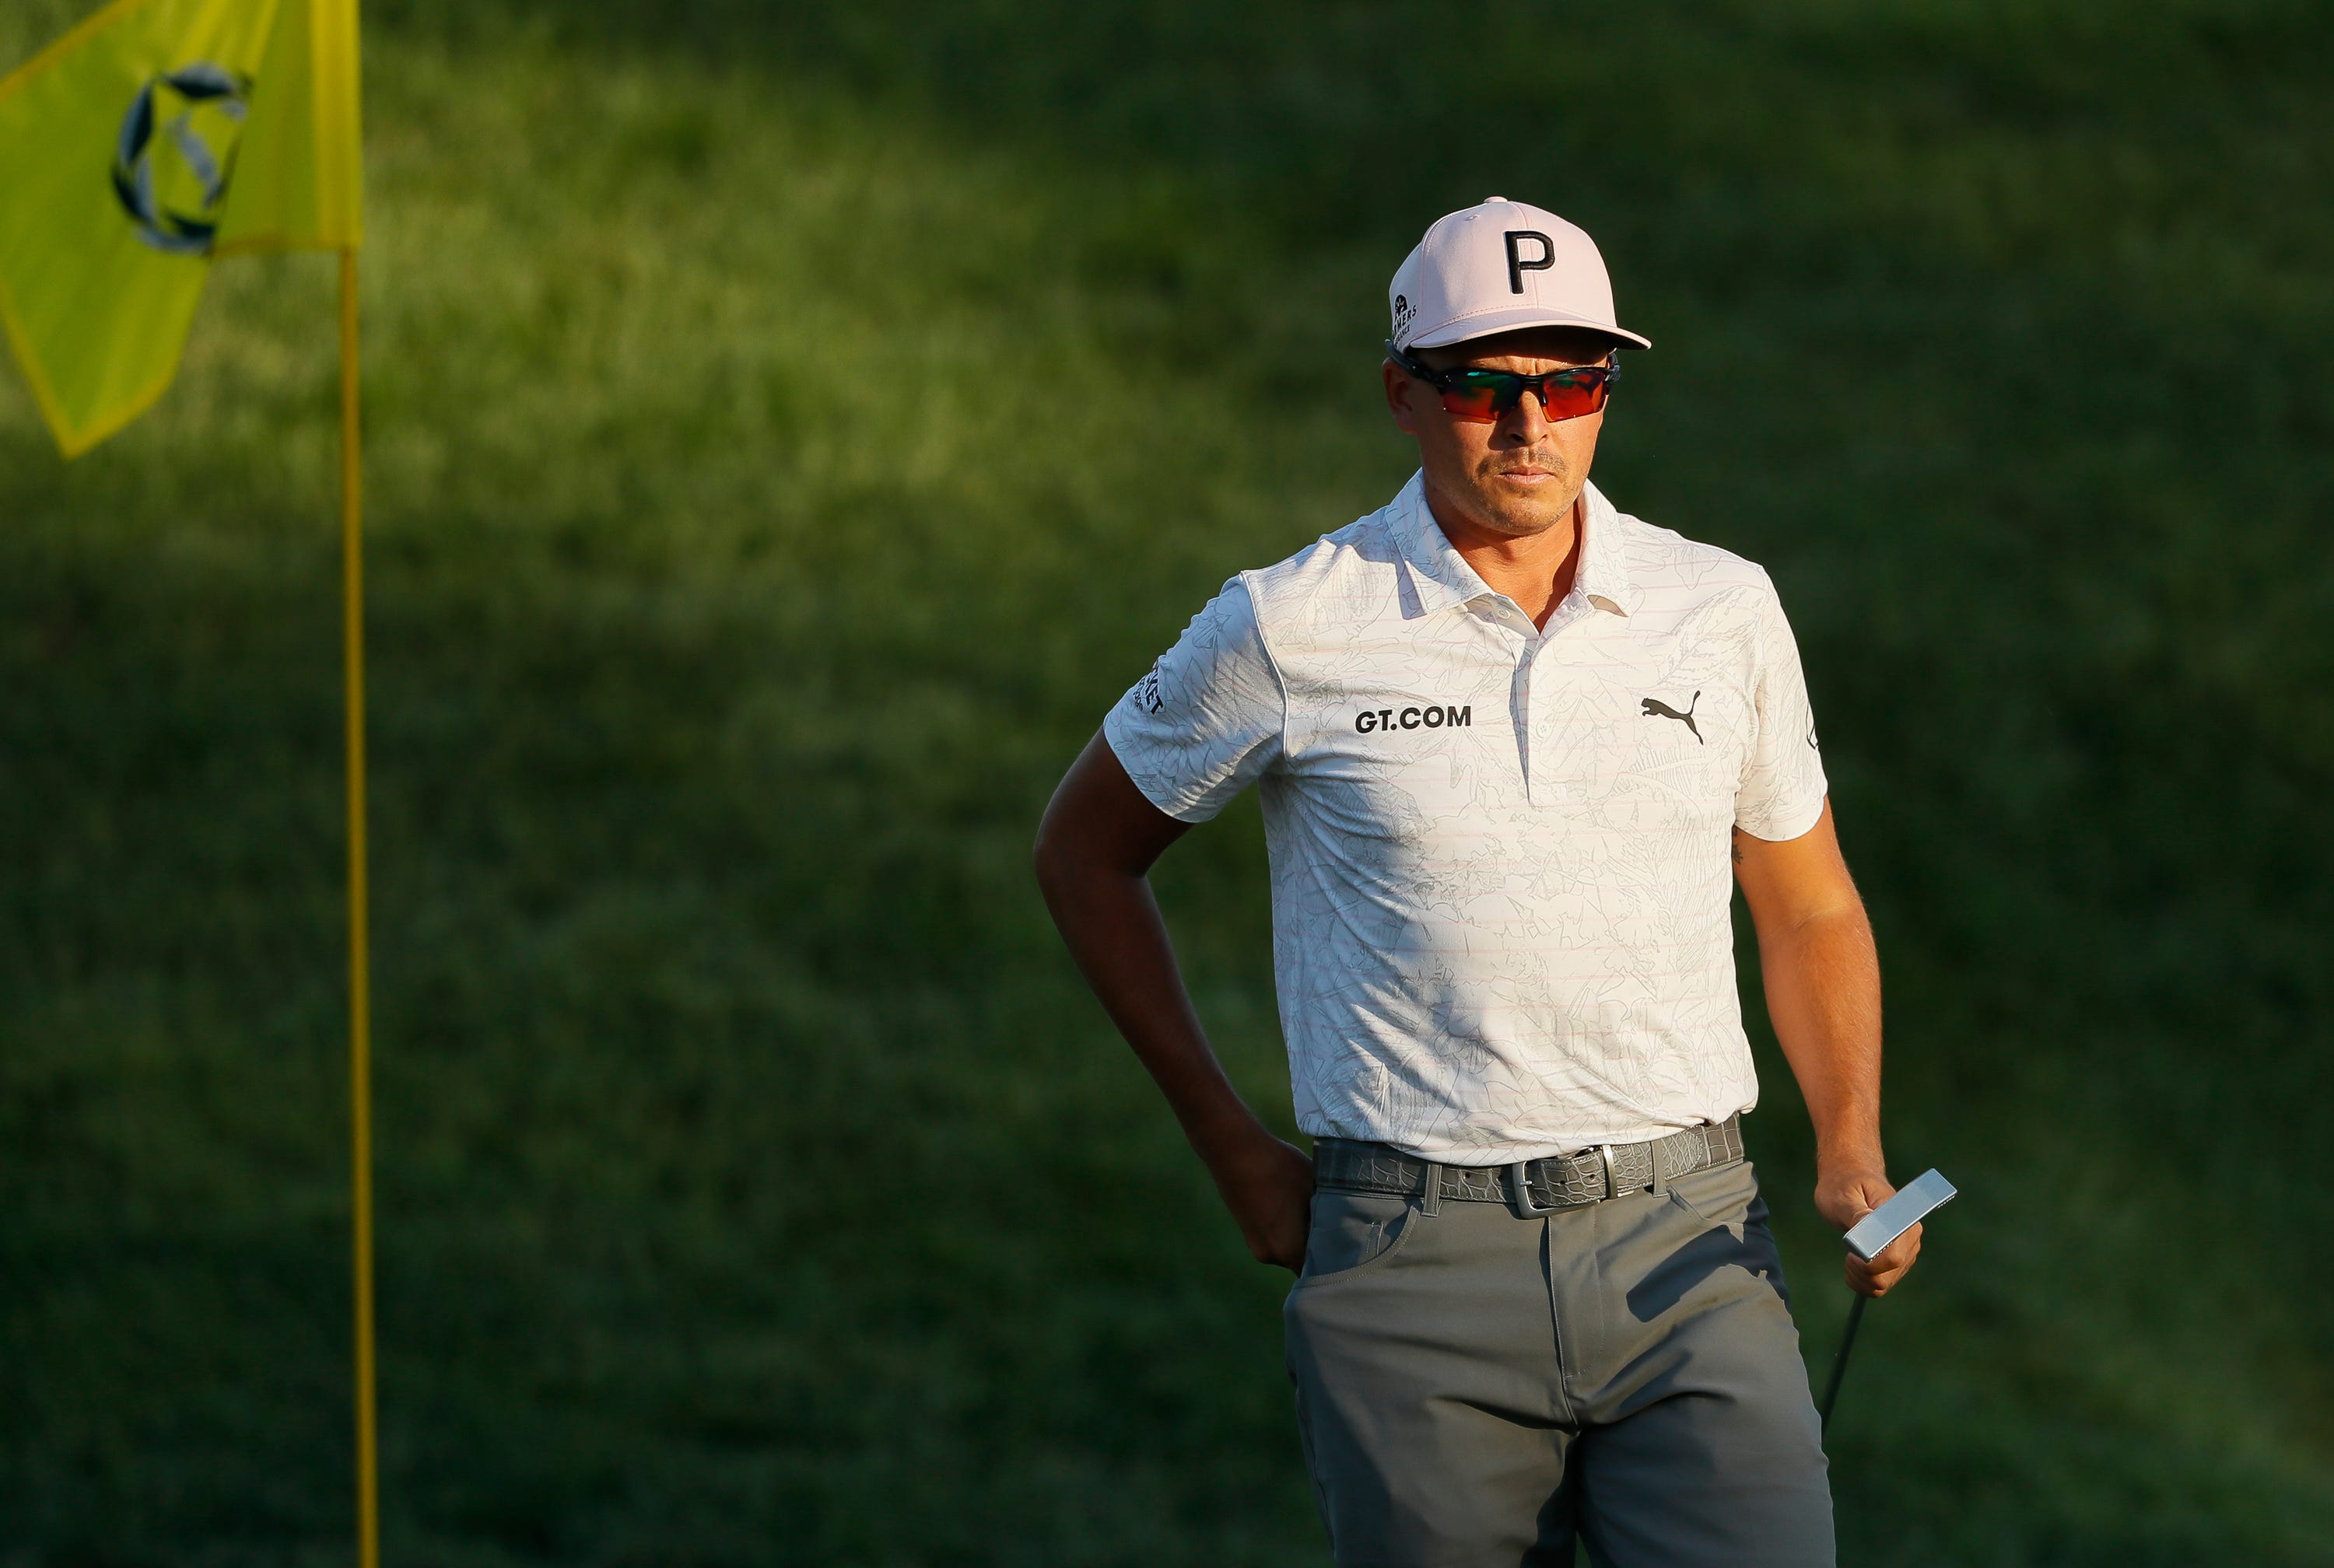 PGA Tour player Rickie Fowler adds frames to his golf game.